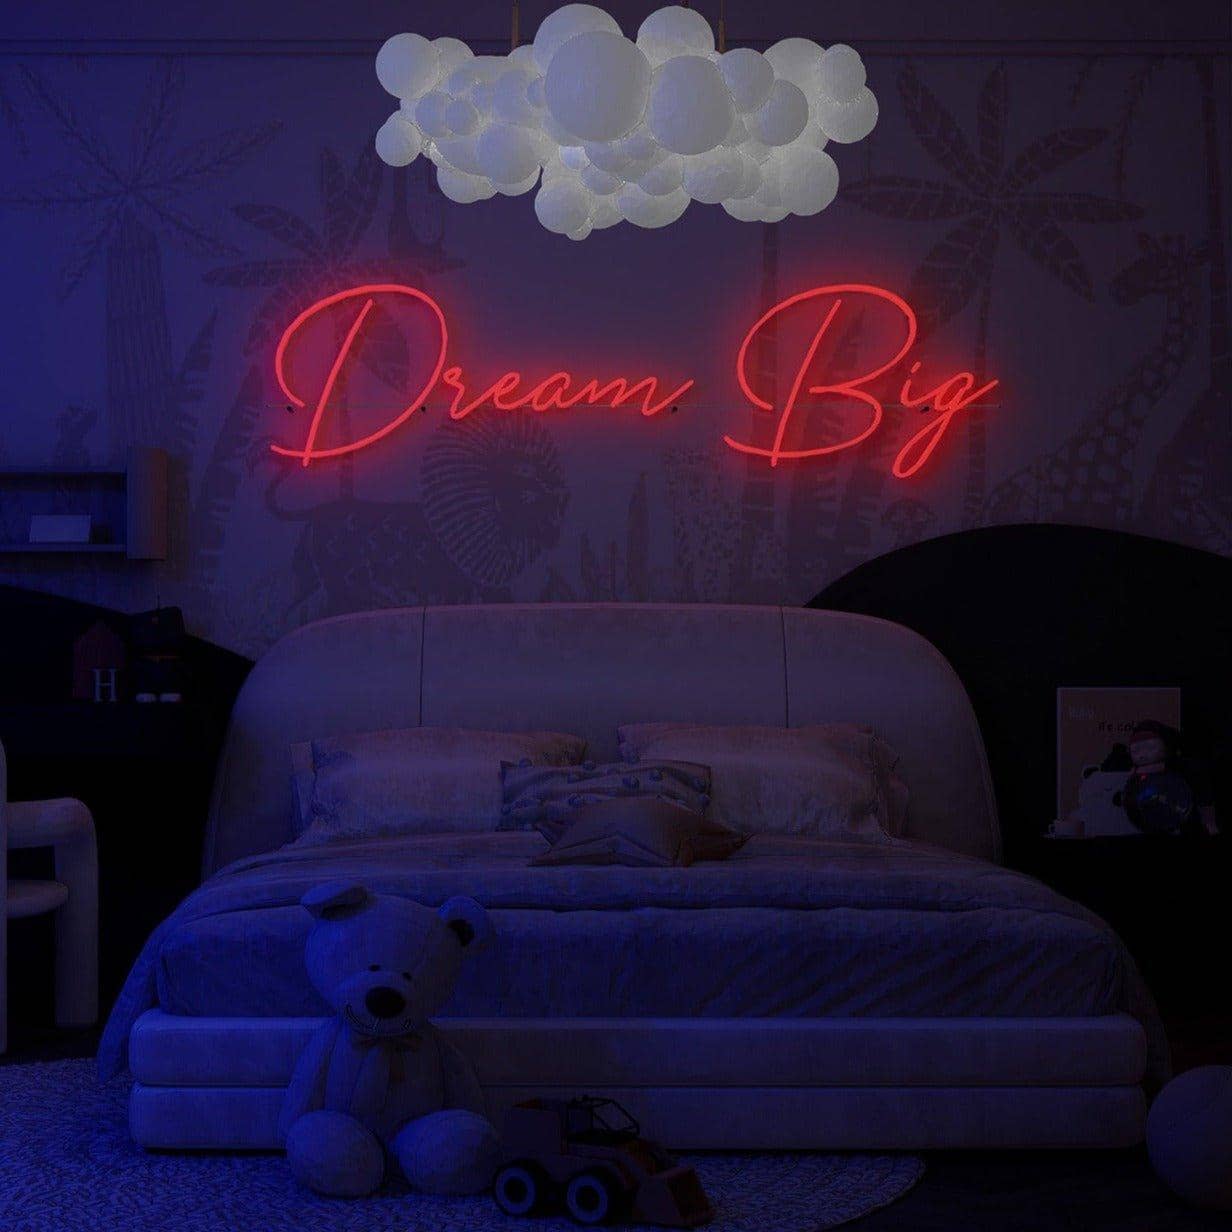 red-neon-lights-are-lit-up-and-displayed-in-the-bedroom-at-night-dream-big